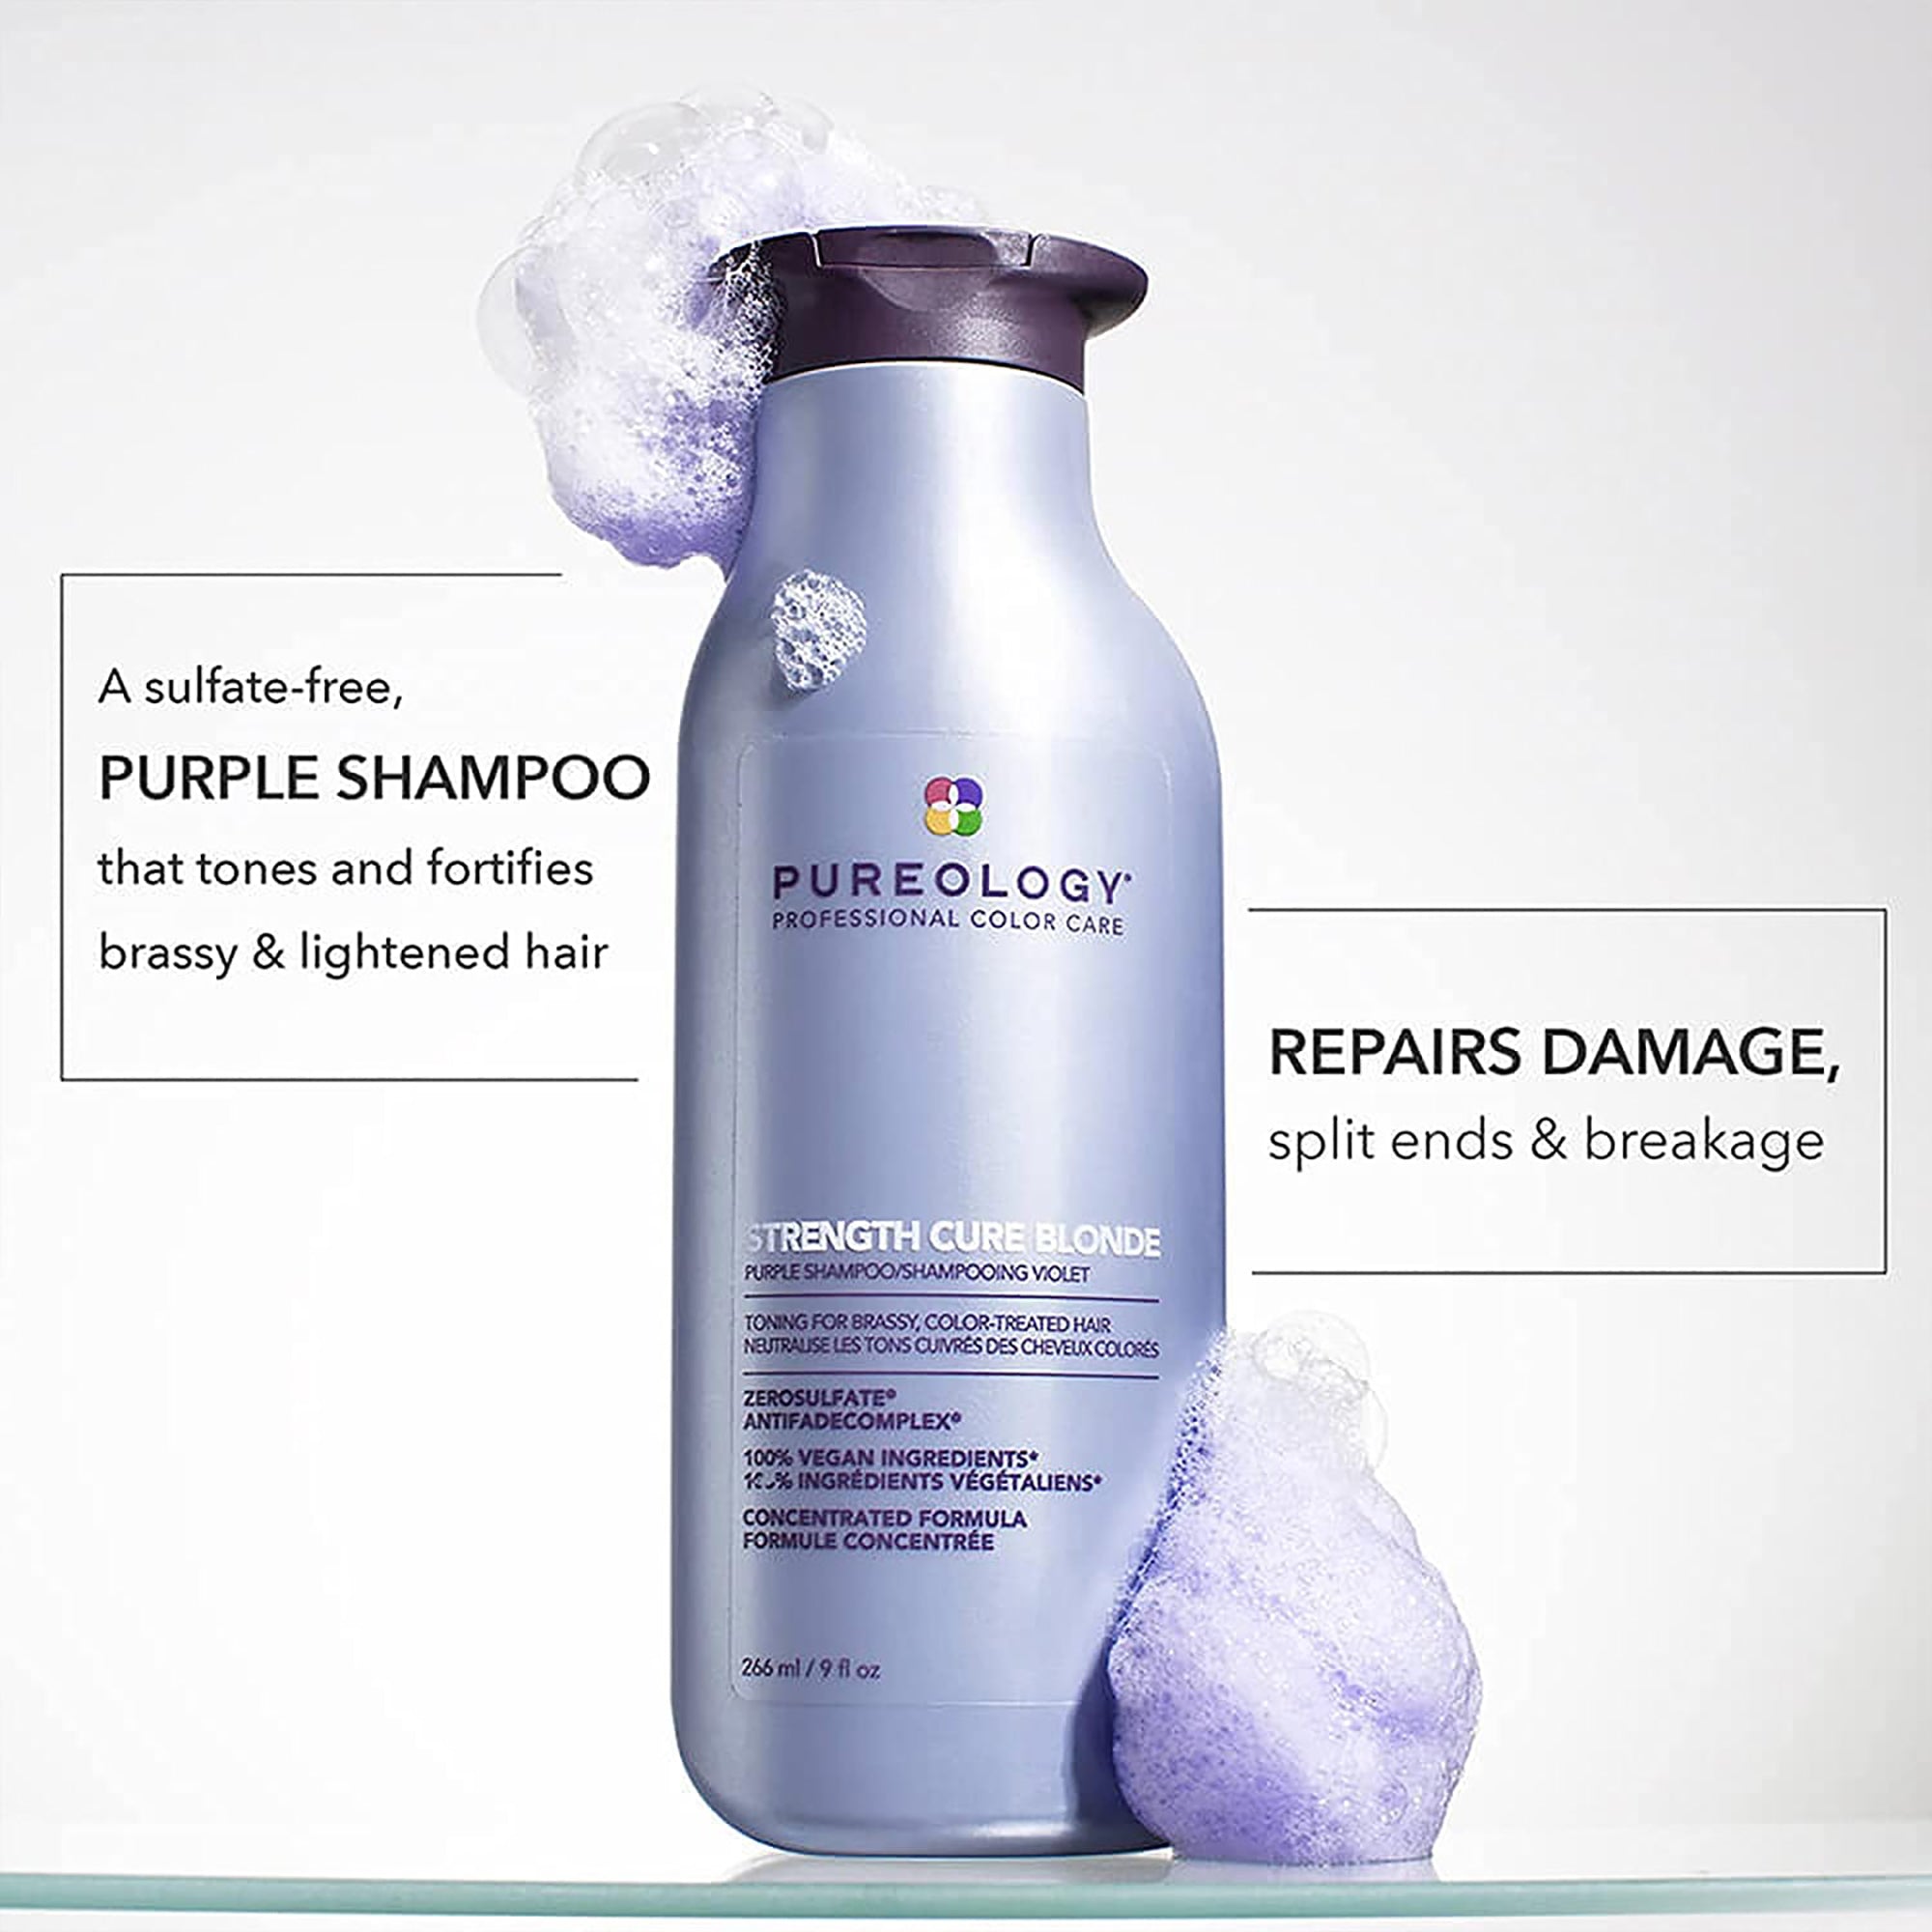 Pureology Strength Cure Blonde Shampoo & Condition Duo / 9OZ